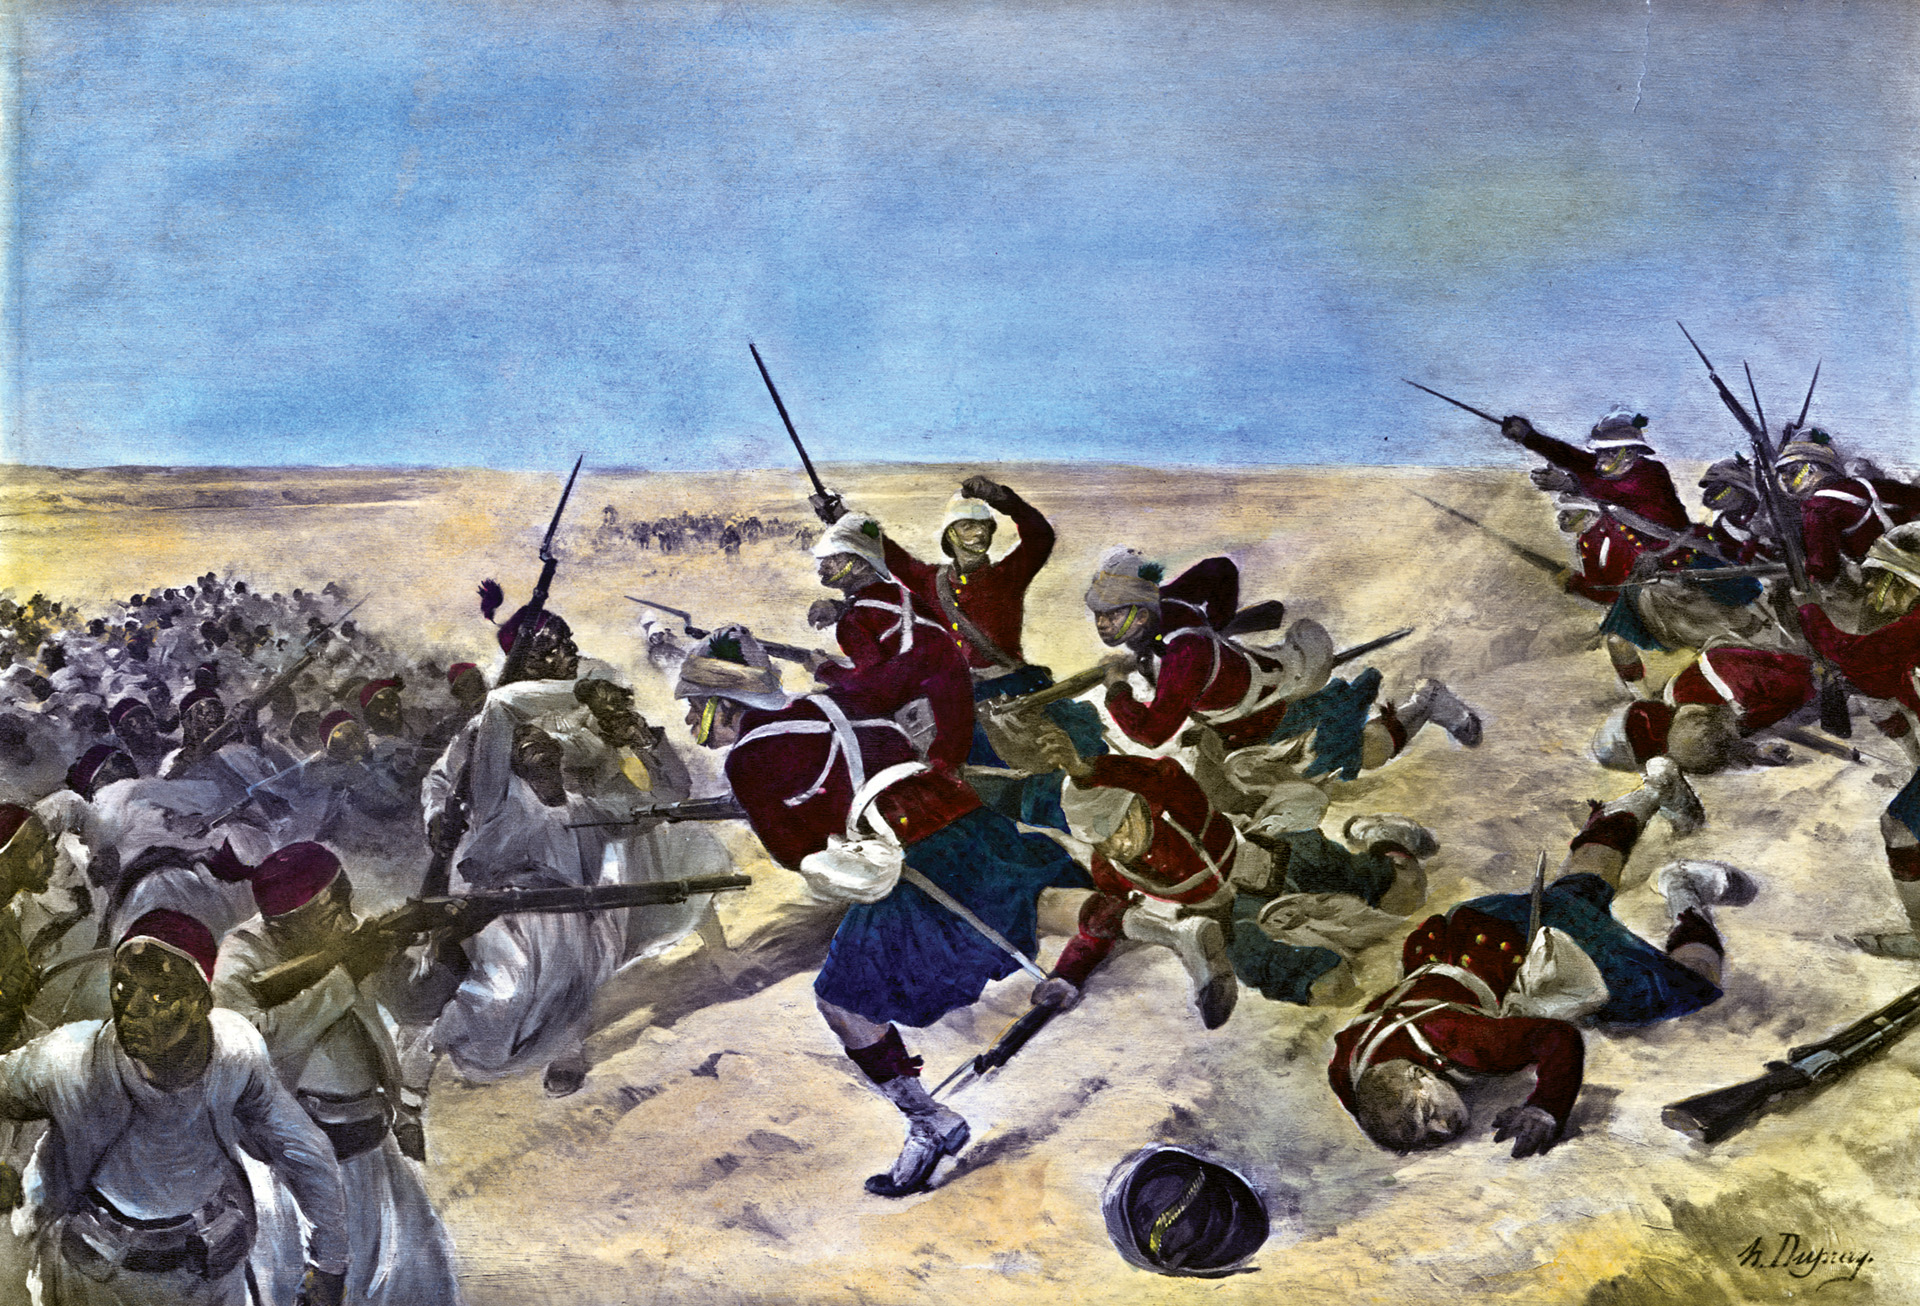 Soldiers of the Black Watch with fixed bayonets storm the enemy trenches in the final attack. The British victory ultimately led to Egypt becoming a British protectorate.